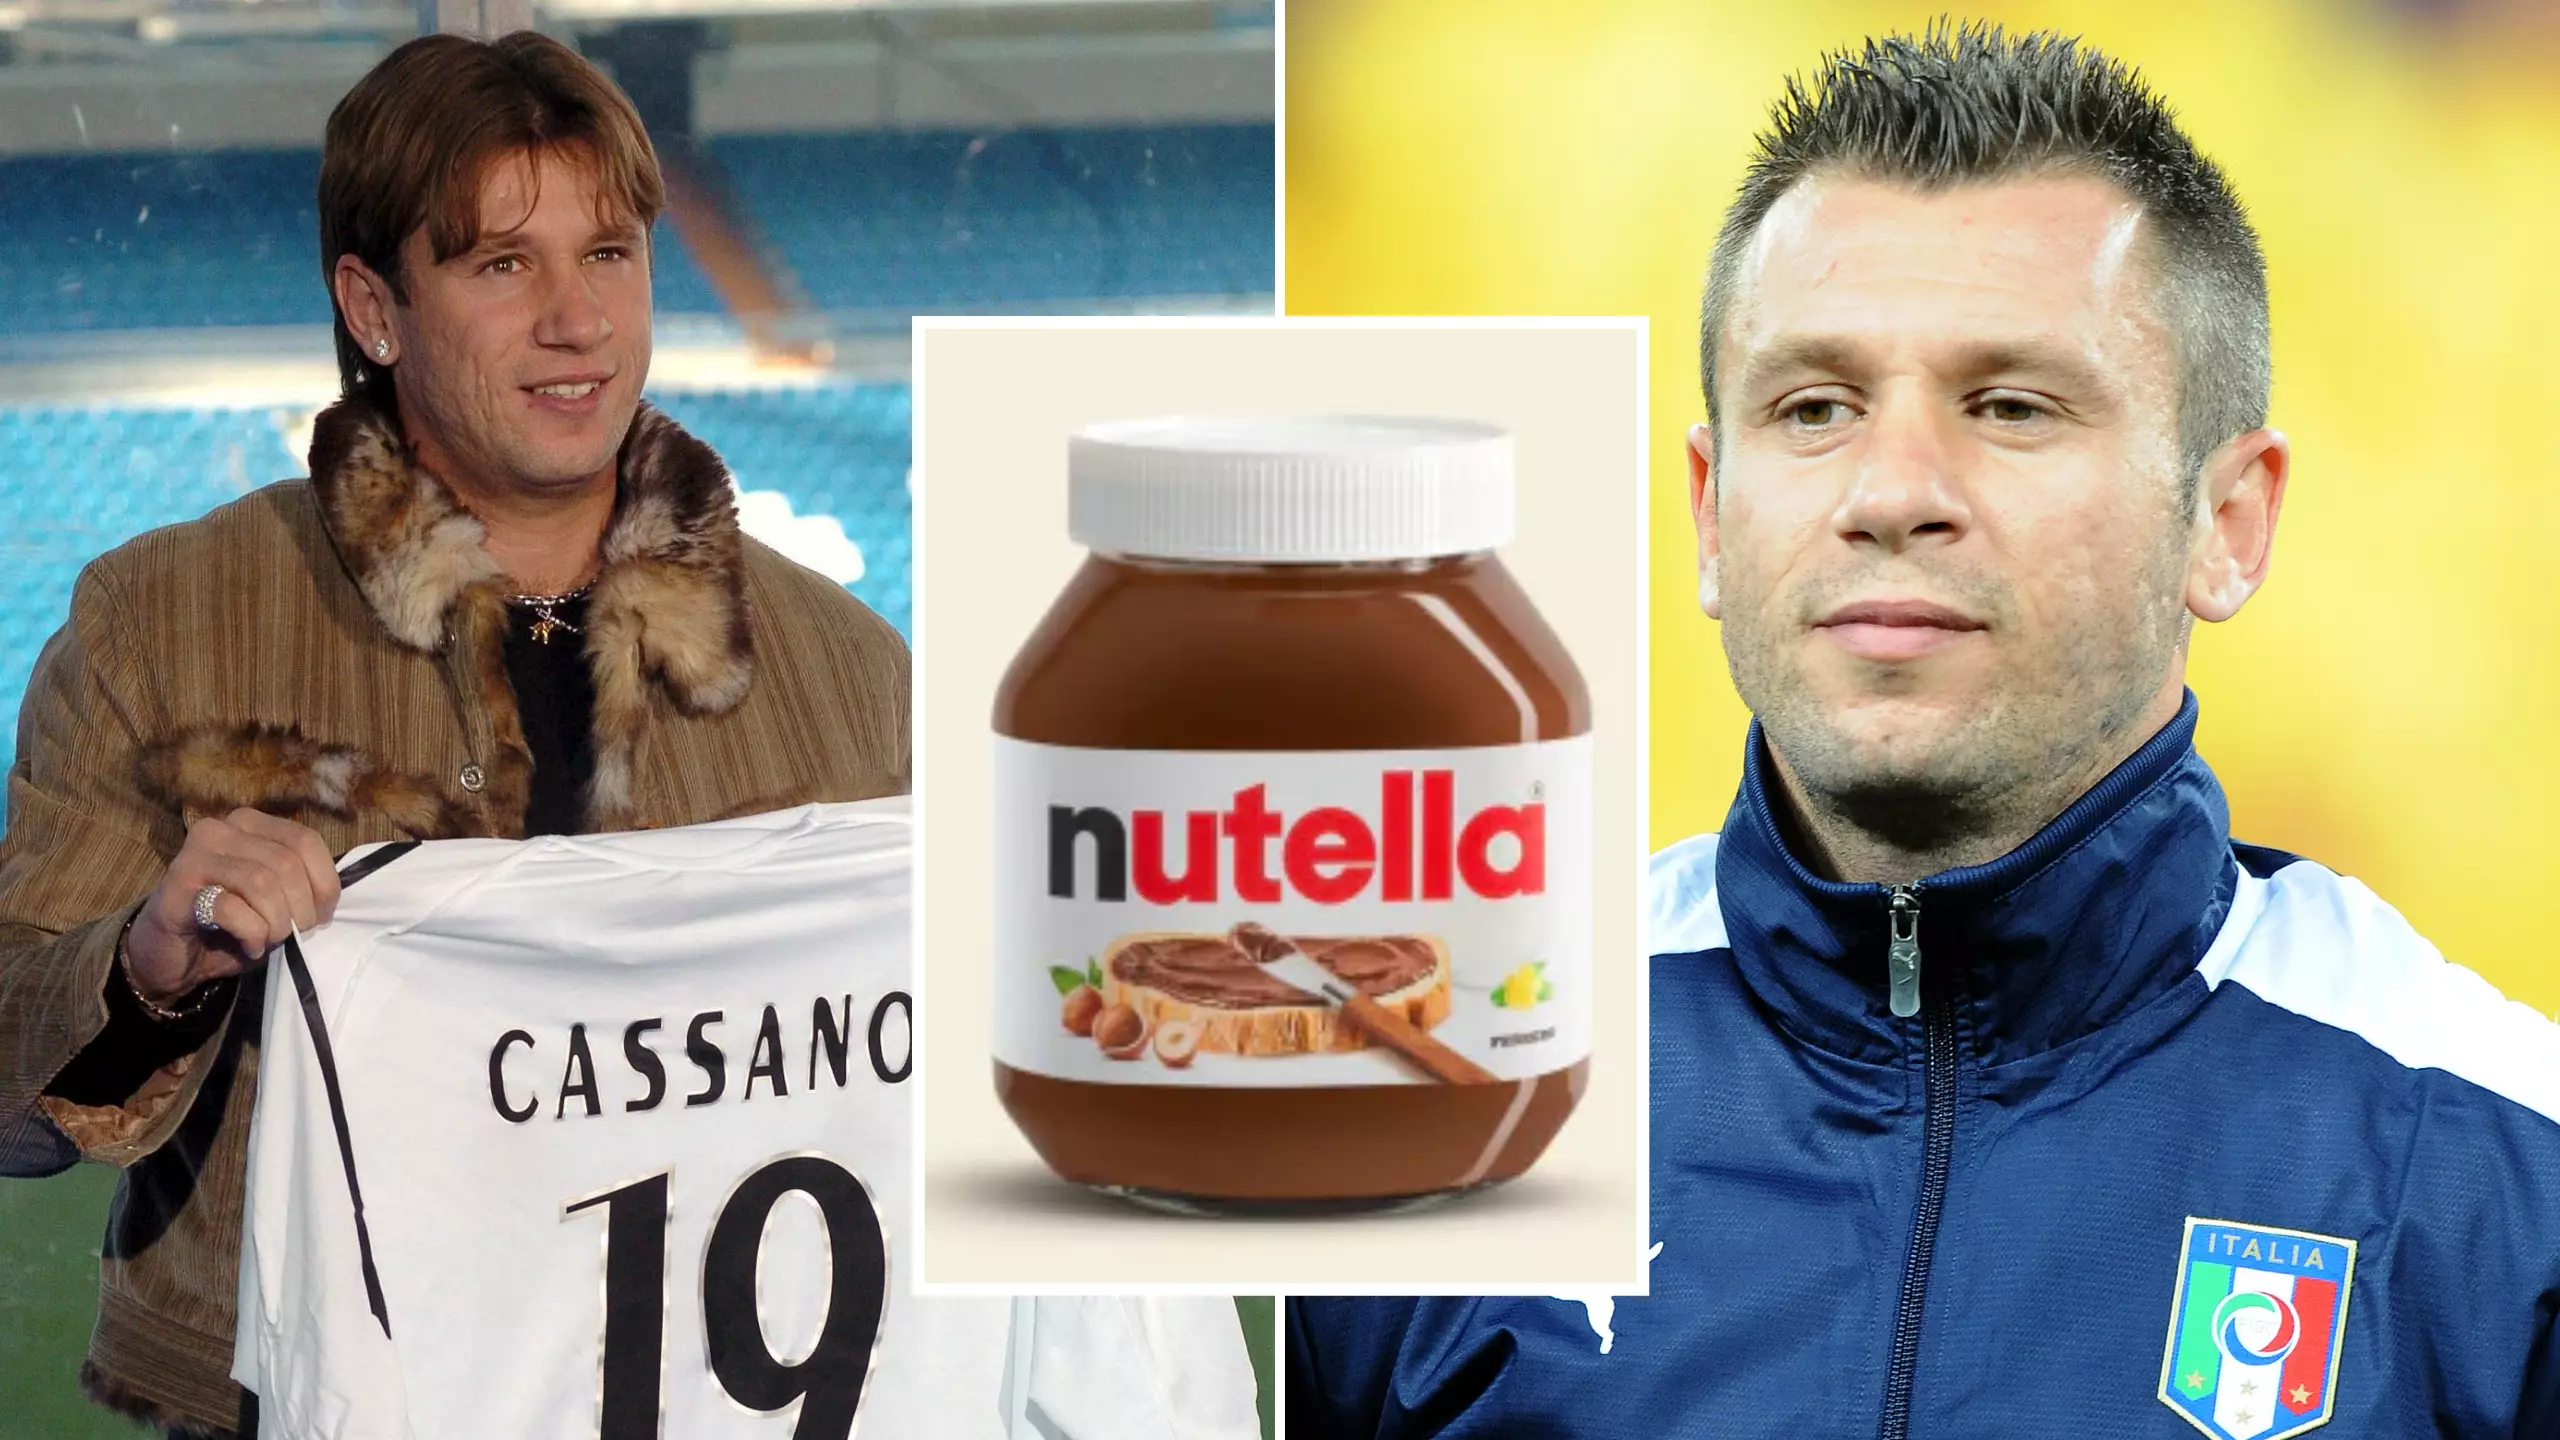 Antonio Cassano "Ate Nutella Directly From The Pot And Gained 14 Kilos In Seven Months" At Real Madrid